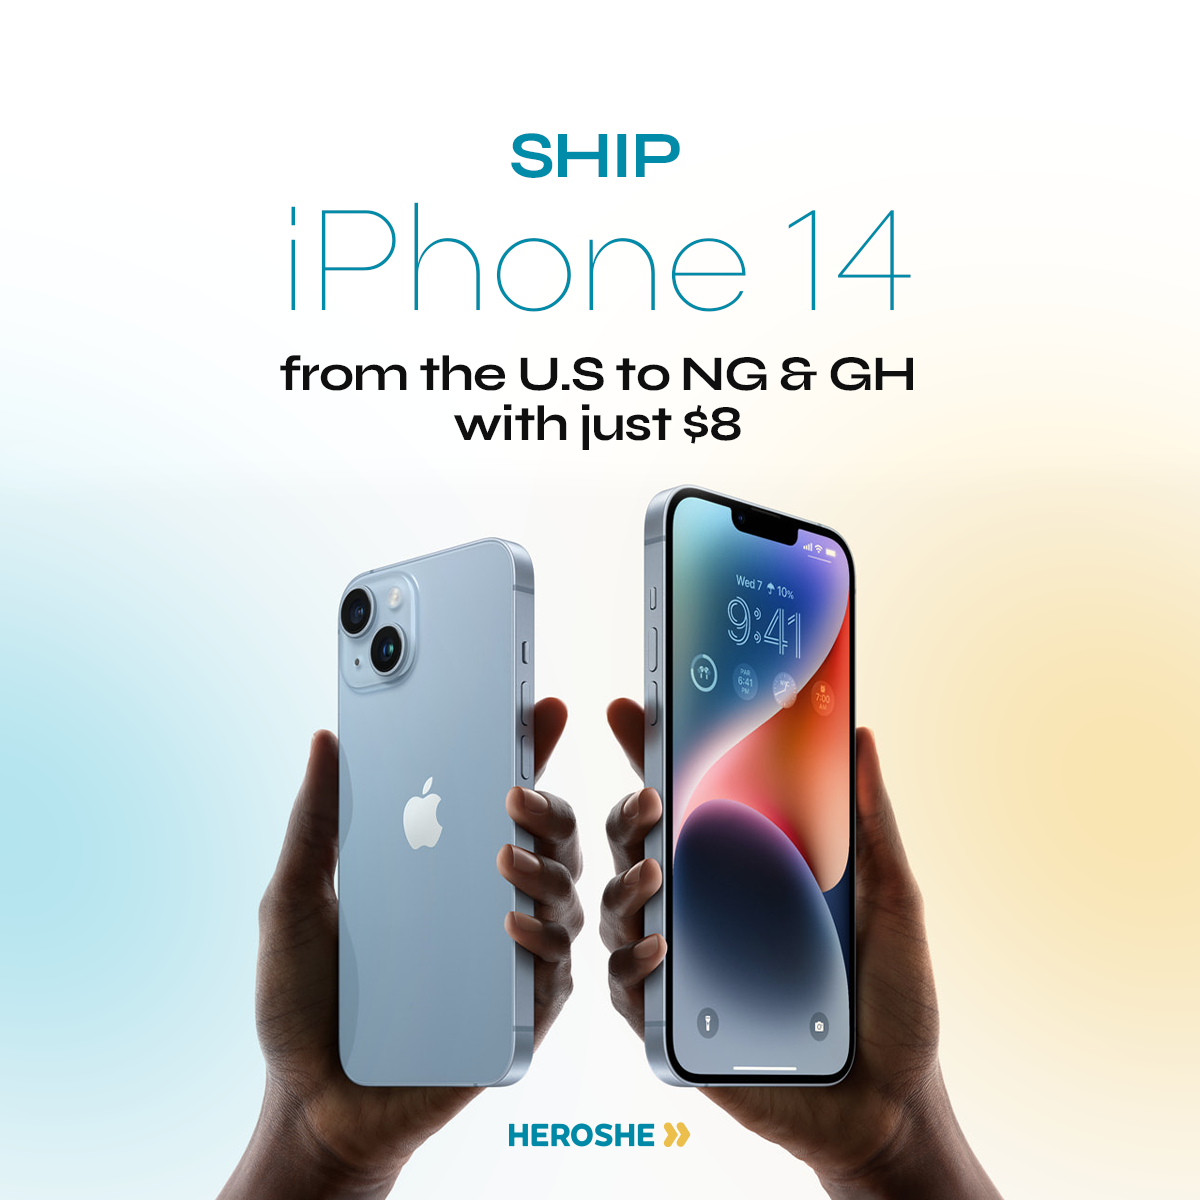 ship iphones from U.S. and U.K. to Nigeria this Black Friday